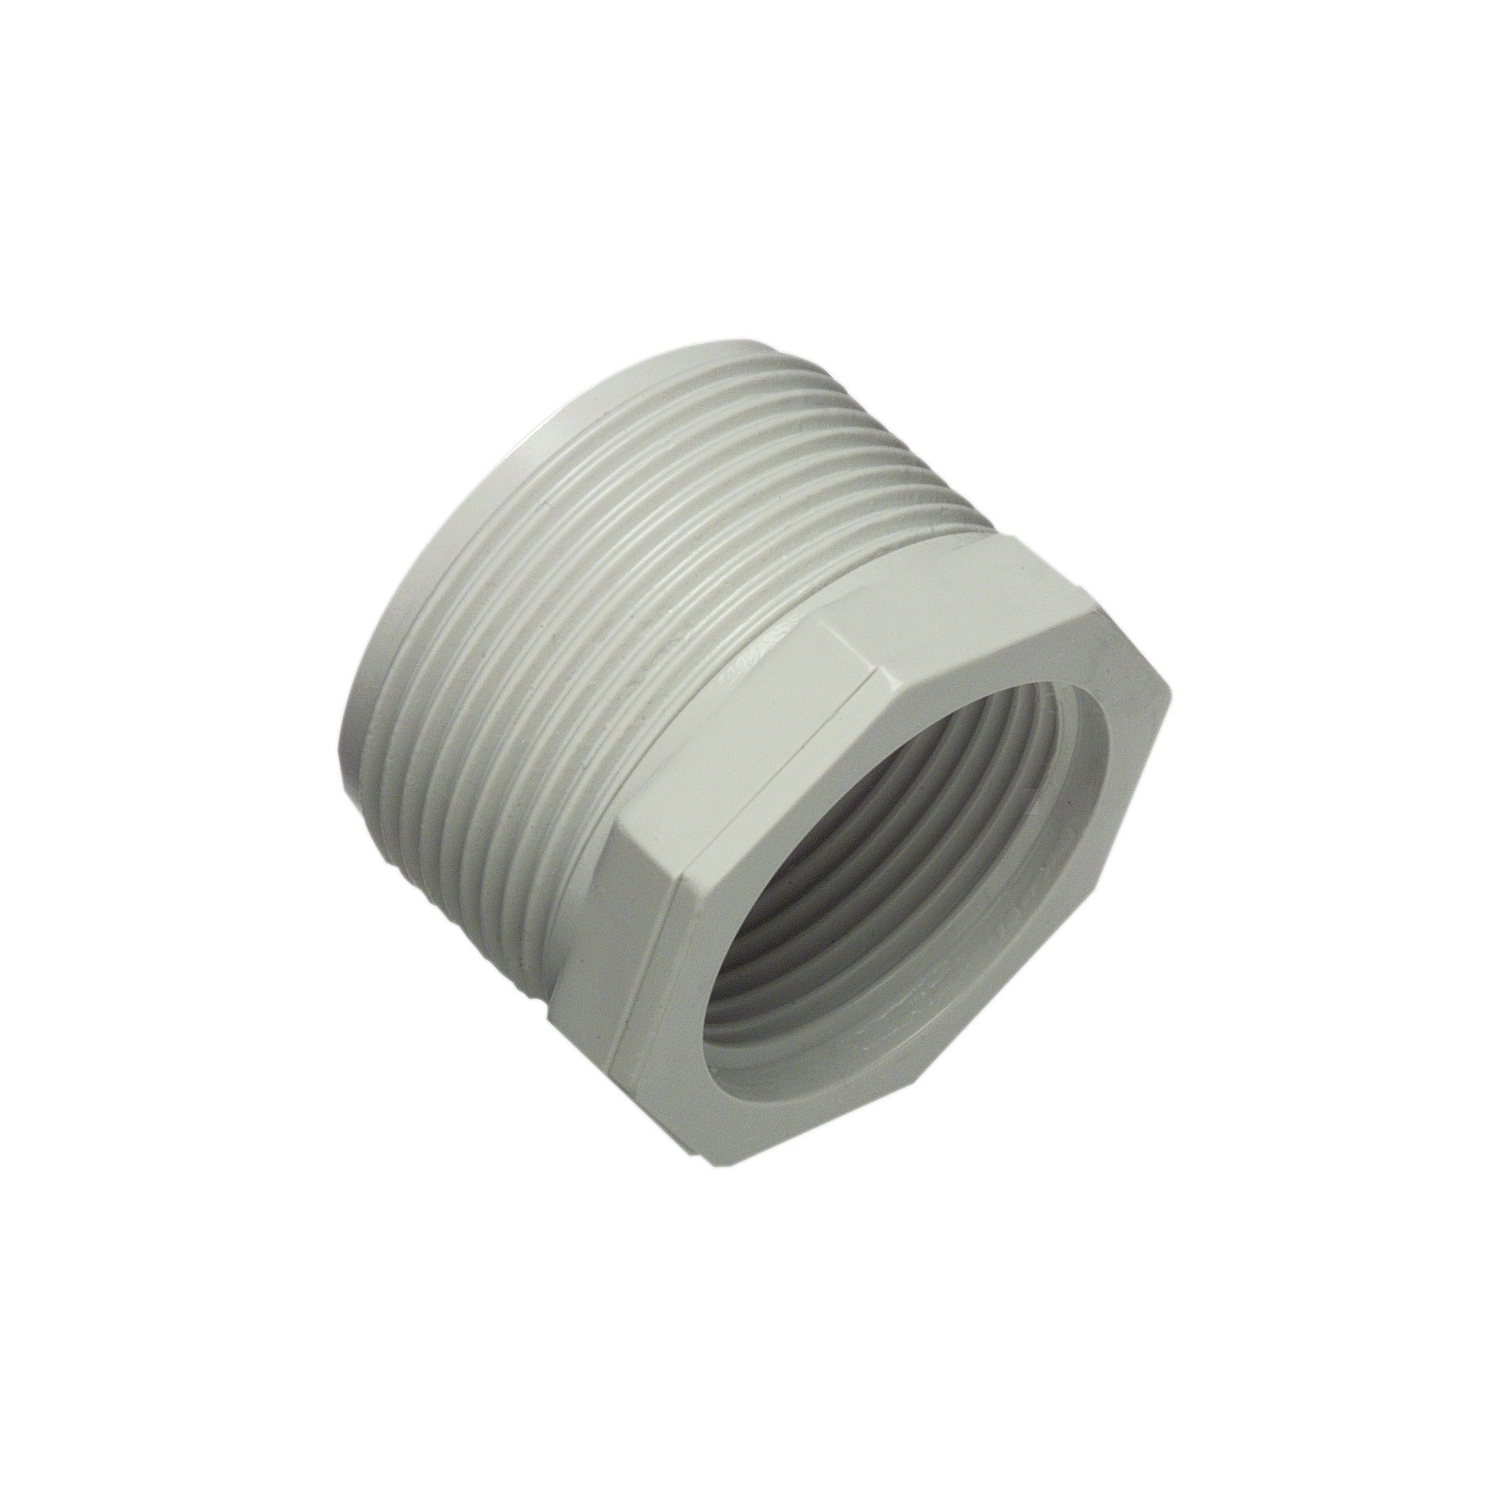 Solid Fittings - PVC, Screwed Reducers, 32mm - 25mm, Grey